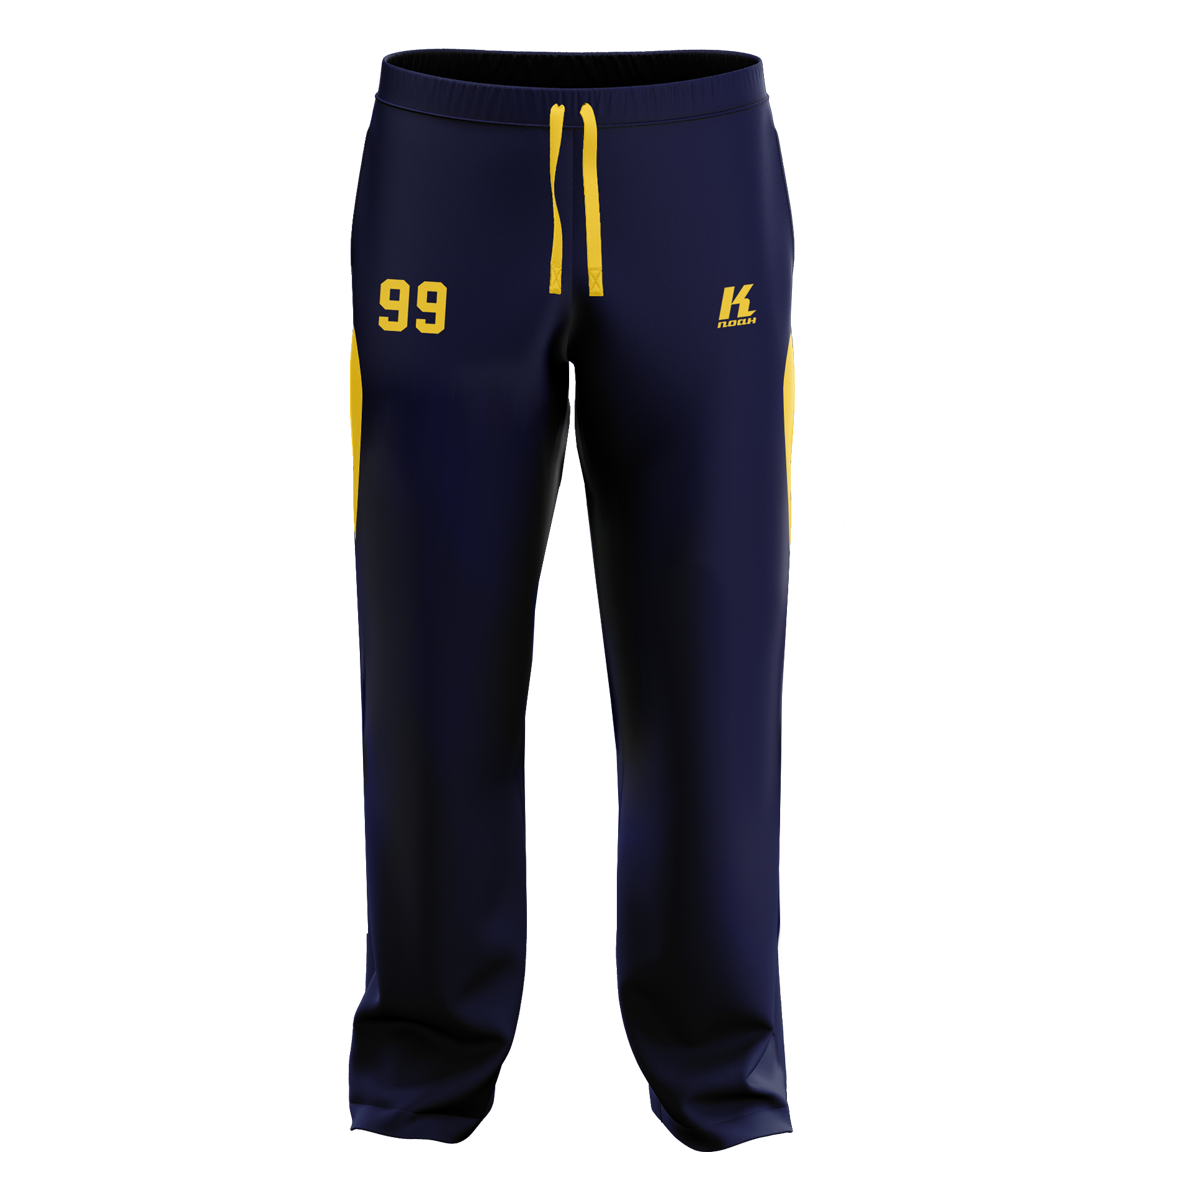 Hornets Signature Series Sweat Pant with Playernumber/Initials